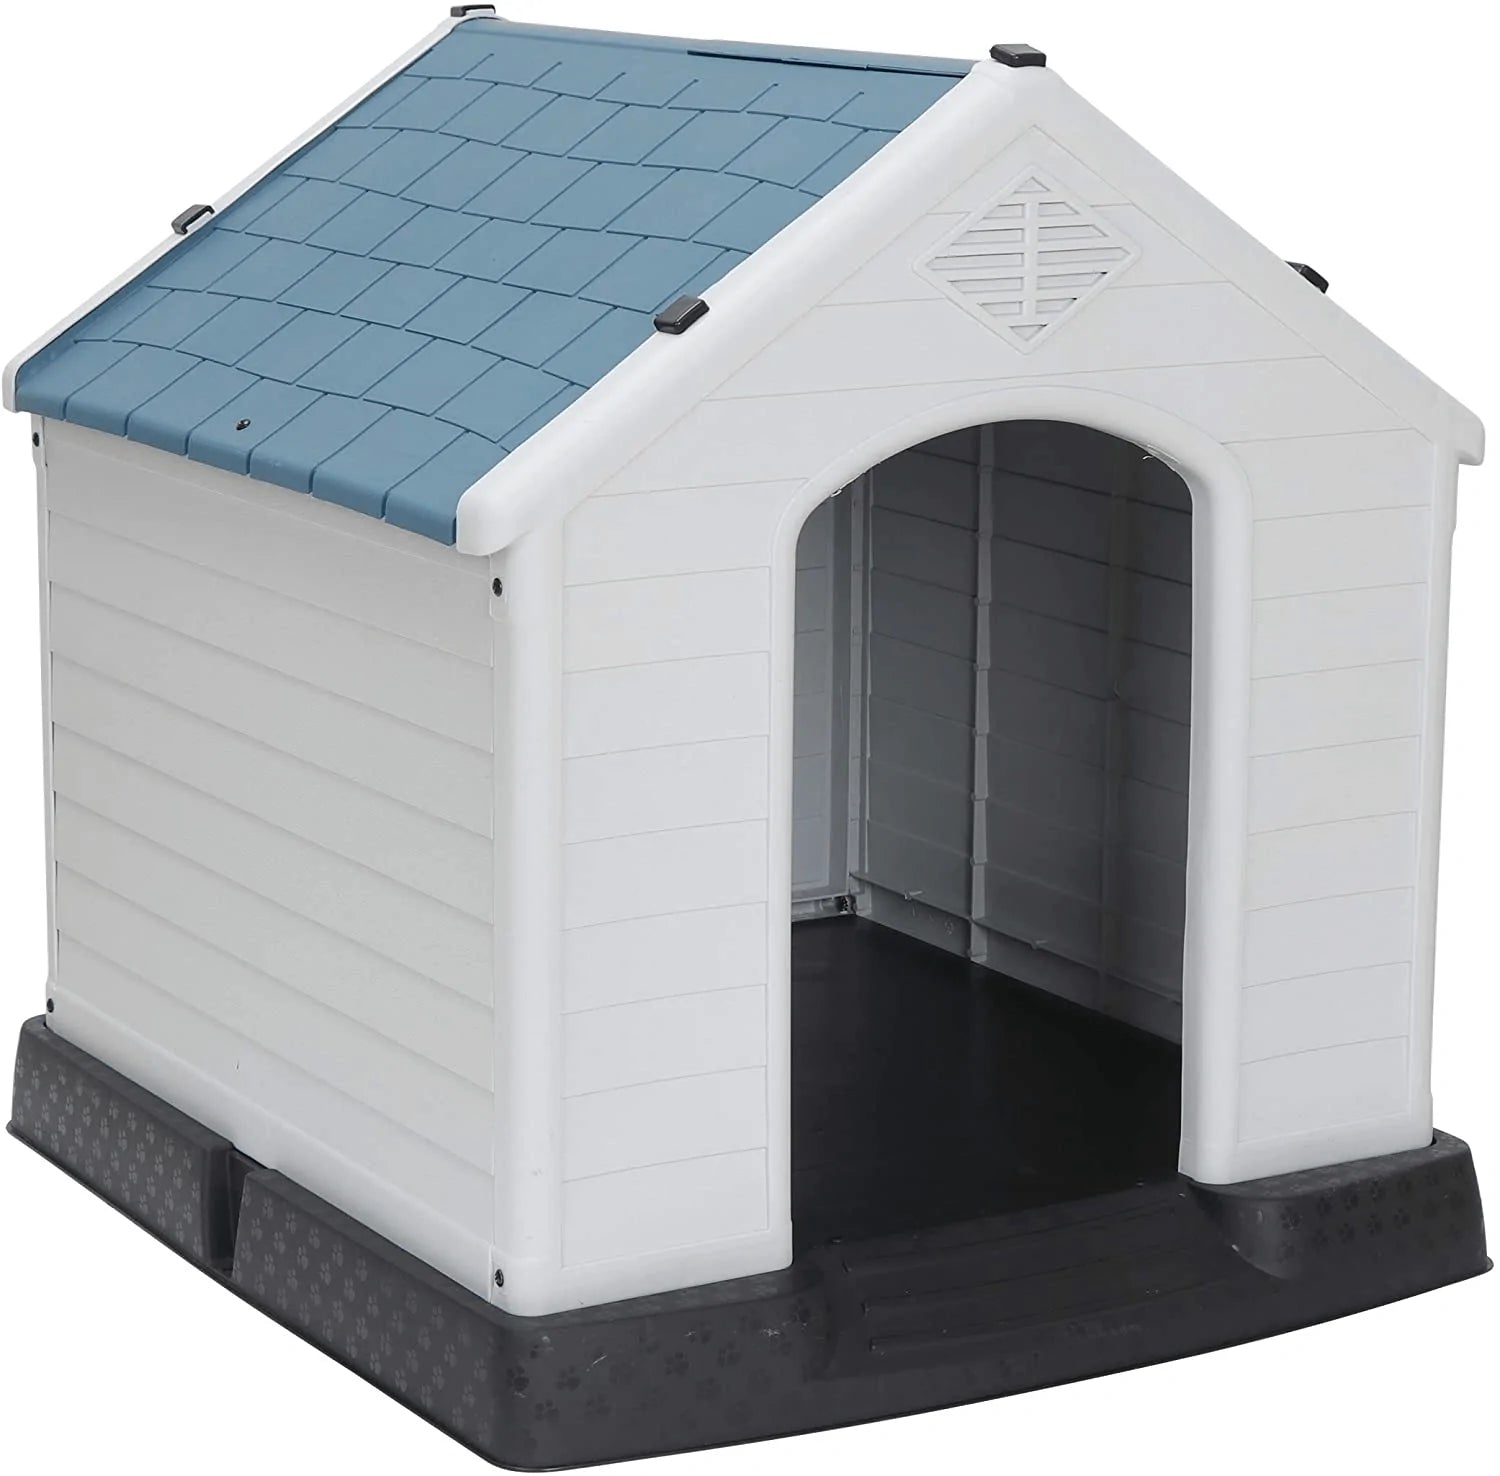 Zenstyle Dog House Medium/Small Pet Kennel Waterproof & Ventilate Shed with Air Vents & Elevated Floor for Outdoor & Indoor